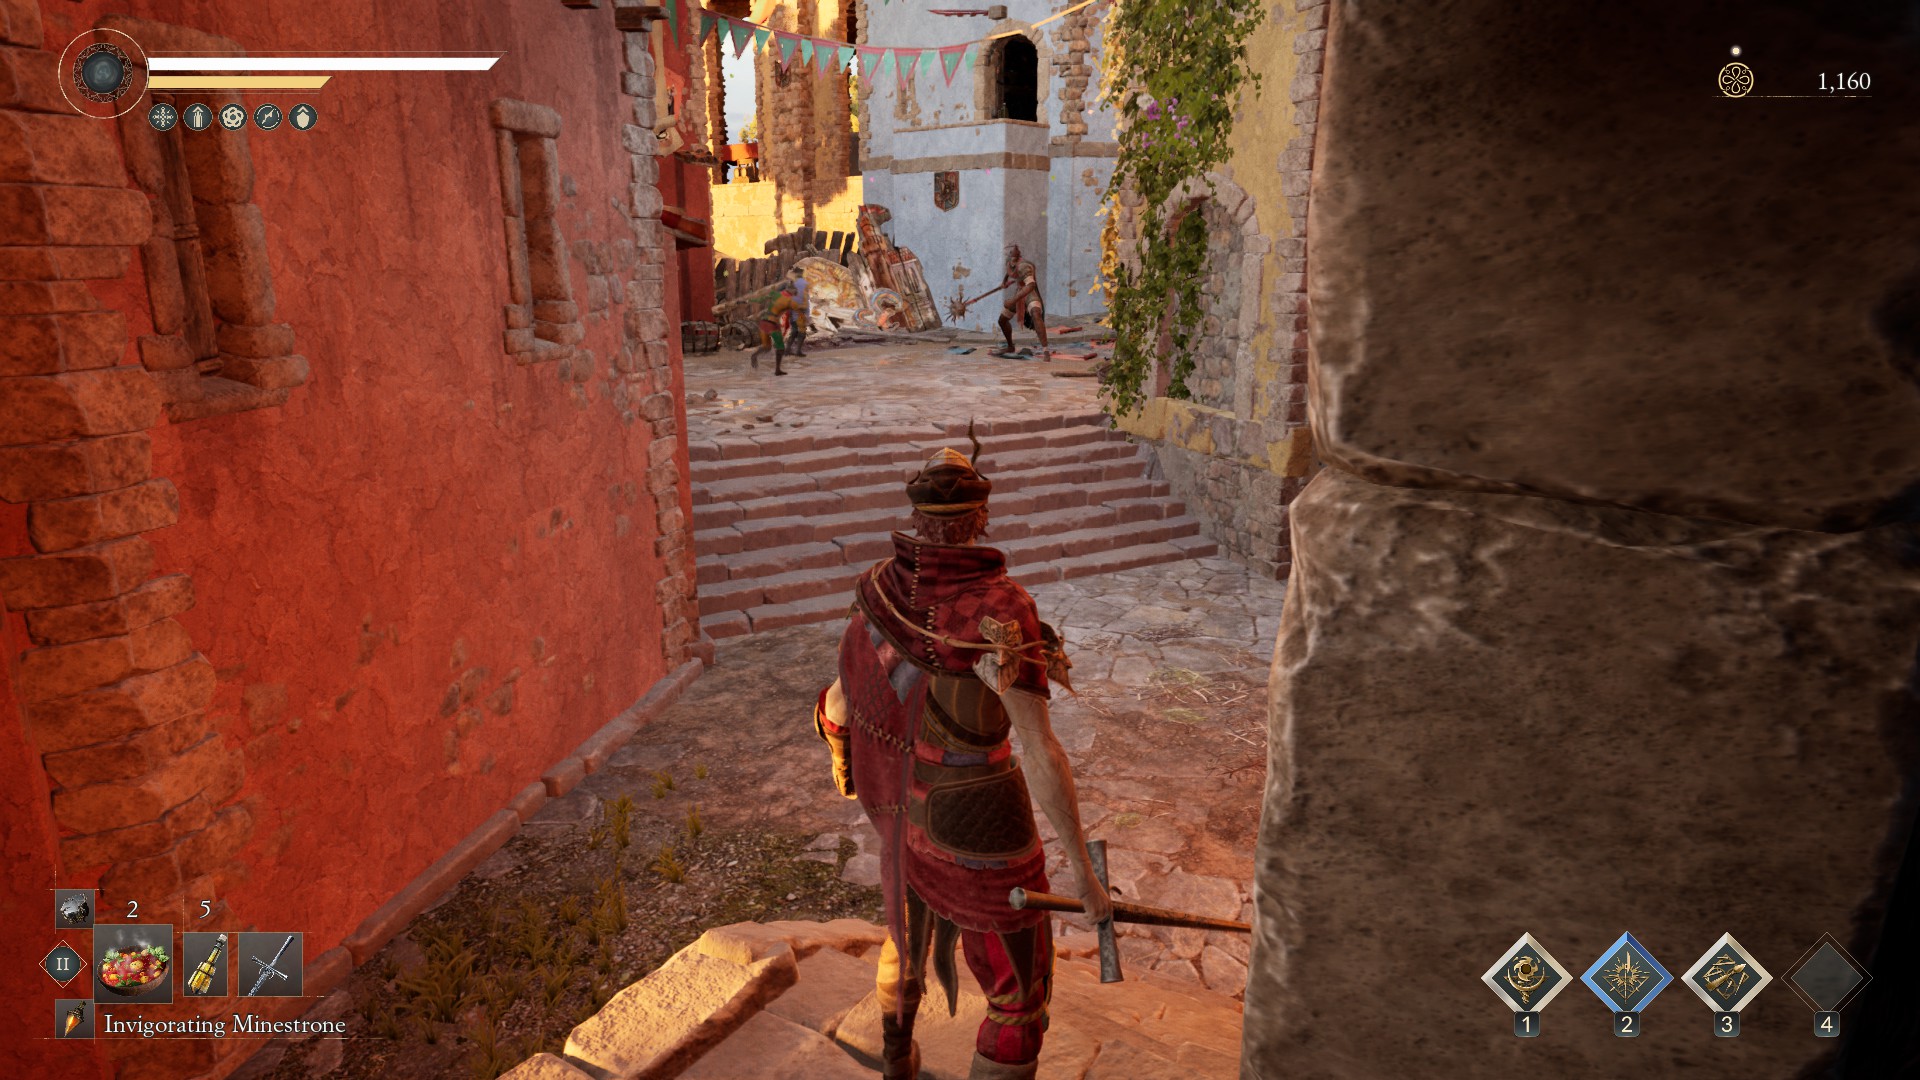 An enemy with a mace waits at the end of a street.